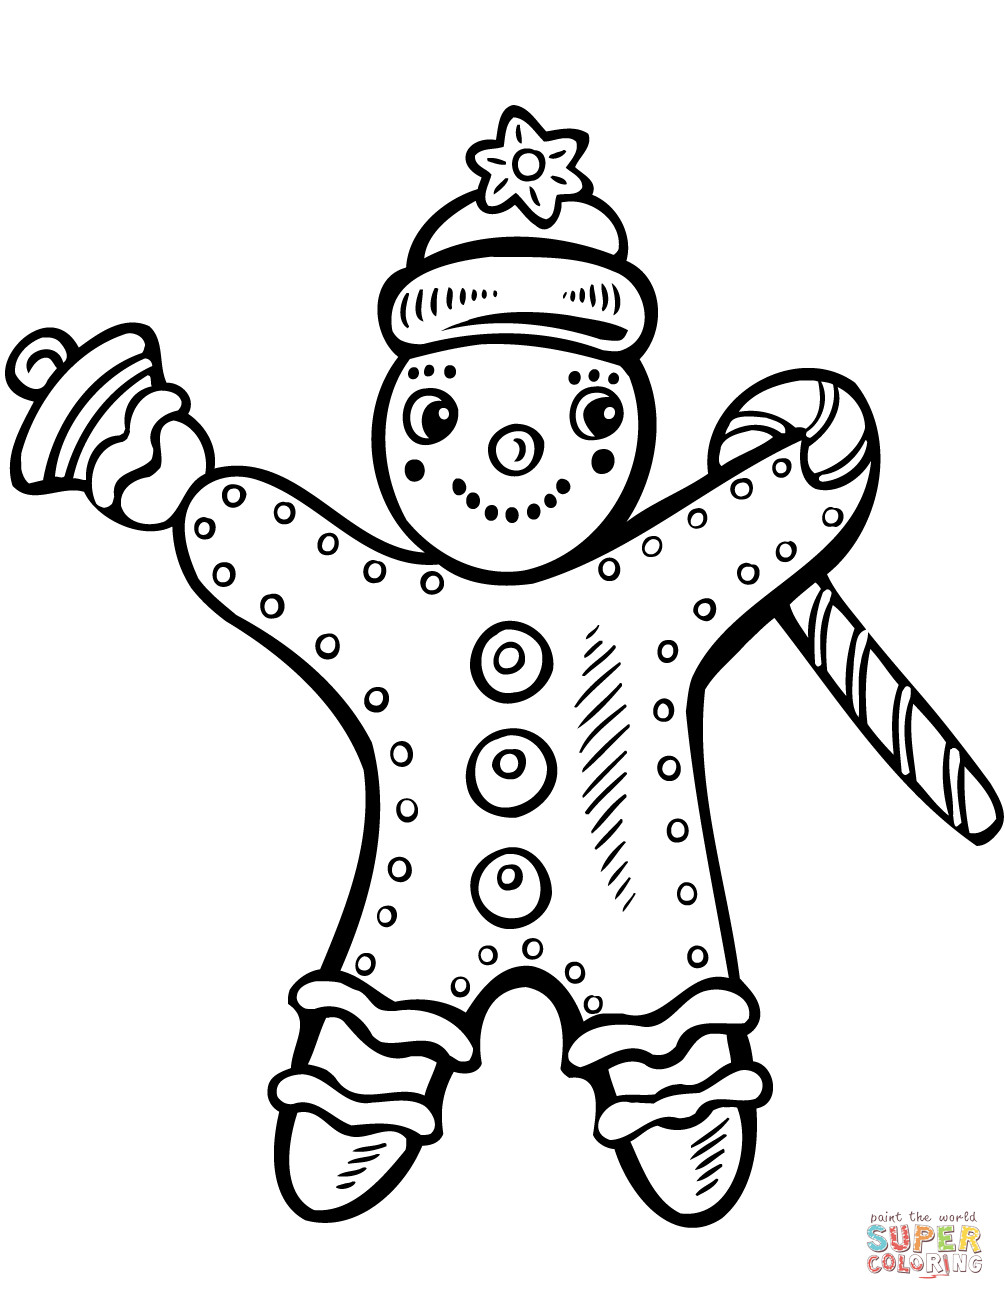 Candy House Coloring Pages For Boys
 Gingerbread House Coloring Pages